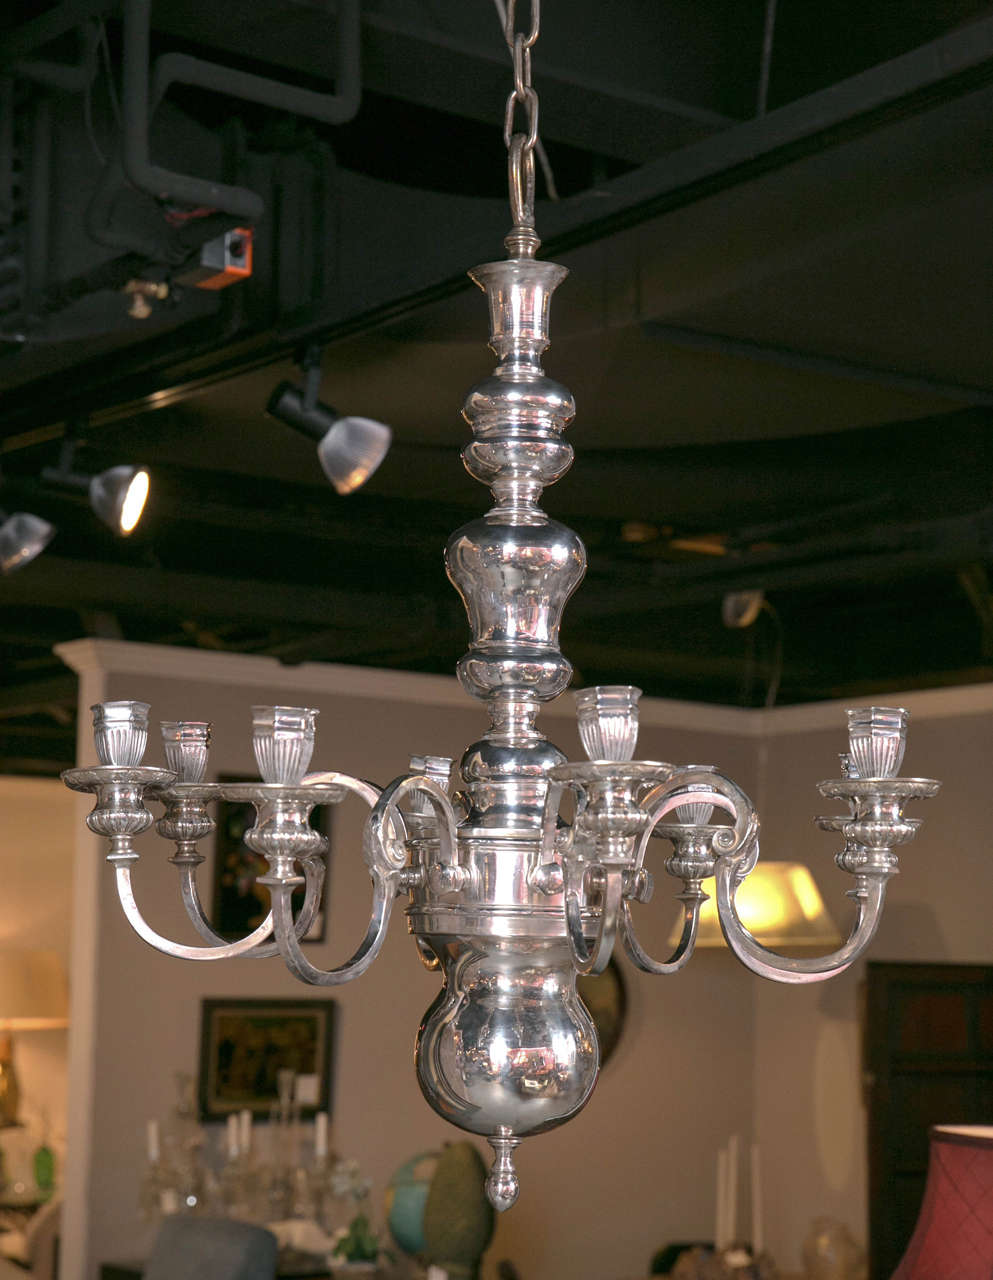 A Caldwell silver-plated, eight light chandelier circa 1900.